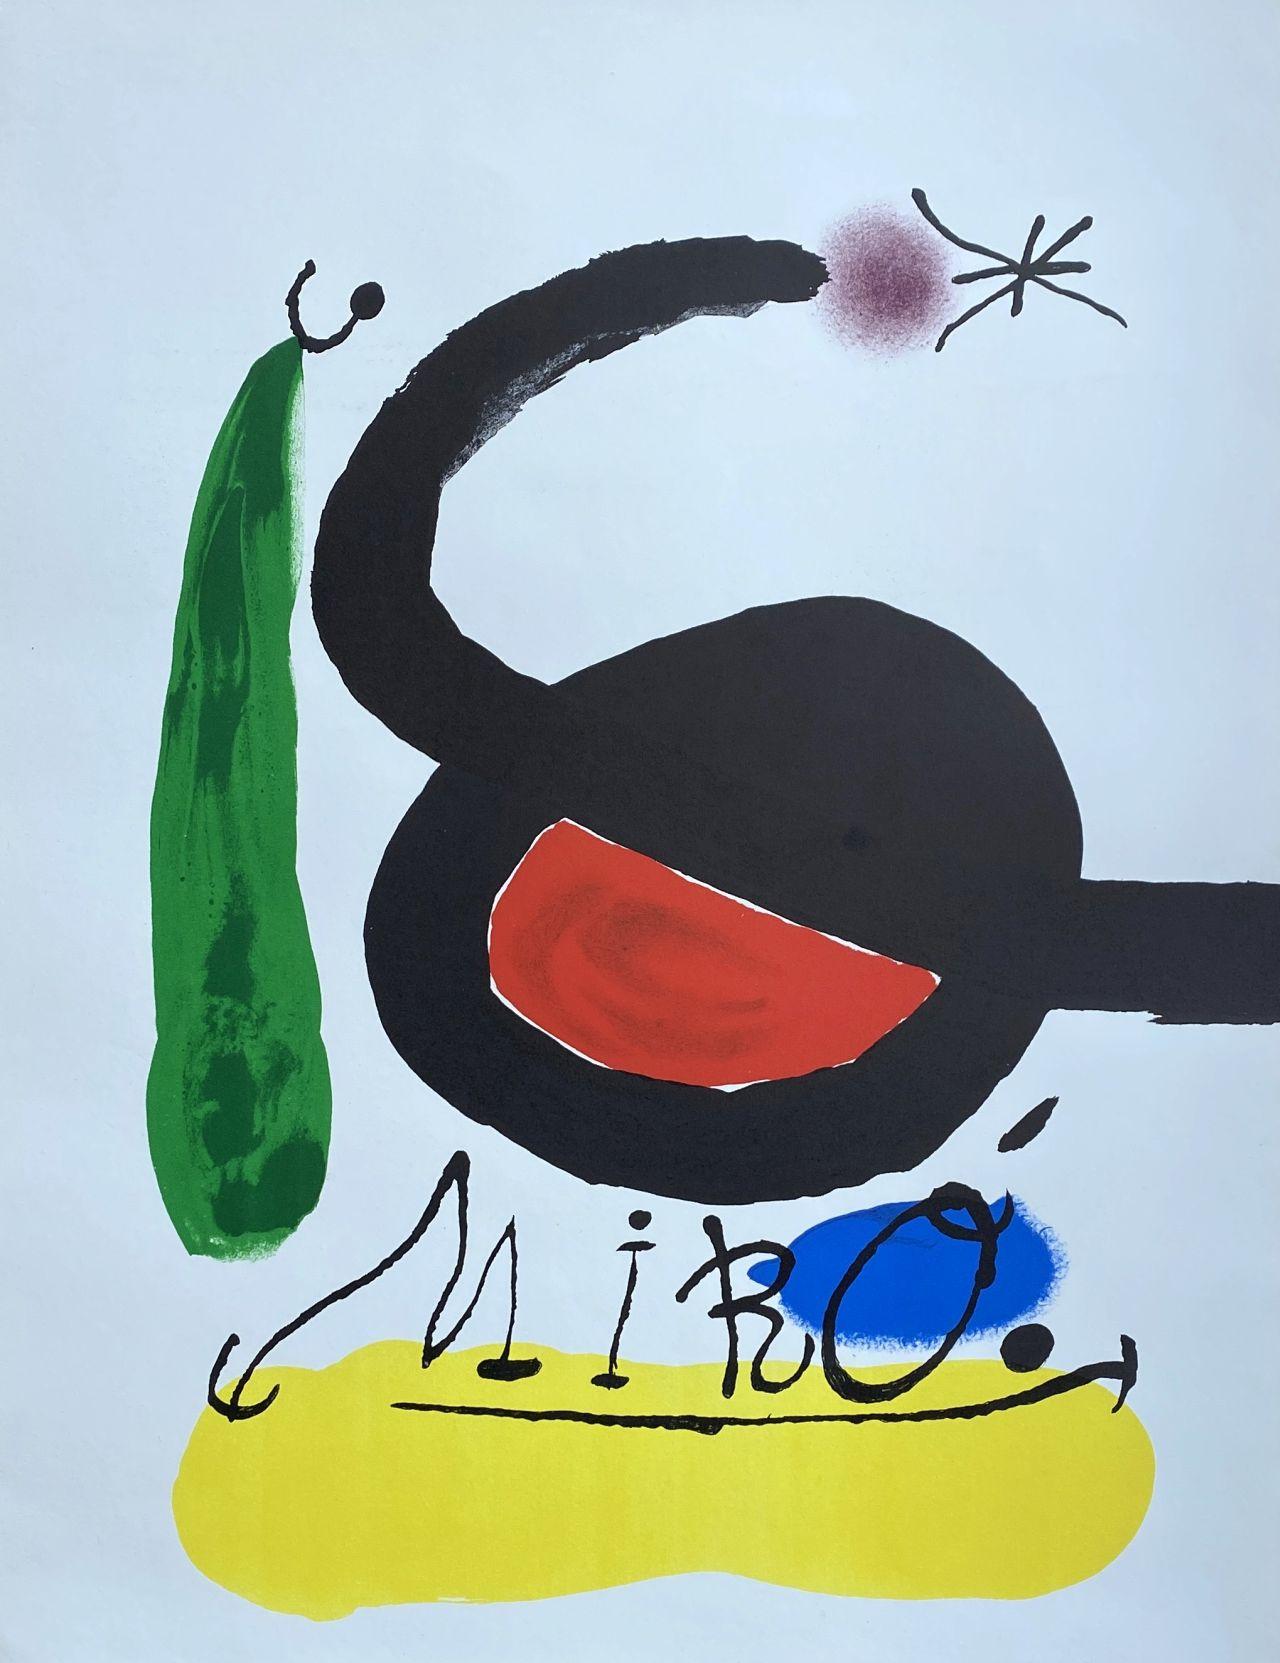 Joan Miró Abstract Print - Surrealist Bird - Colors Lithograph Signed in the Plate - 1971